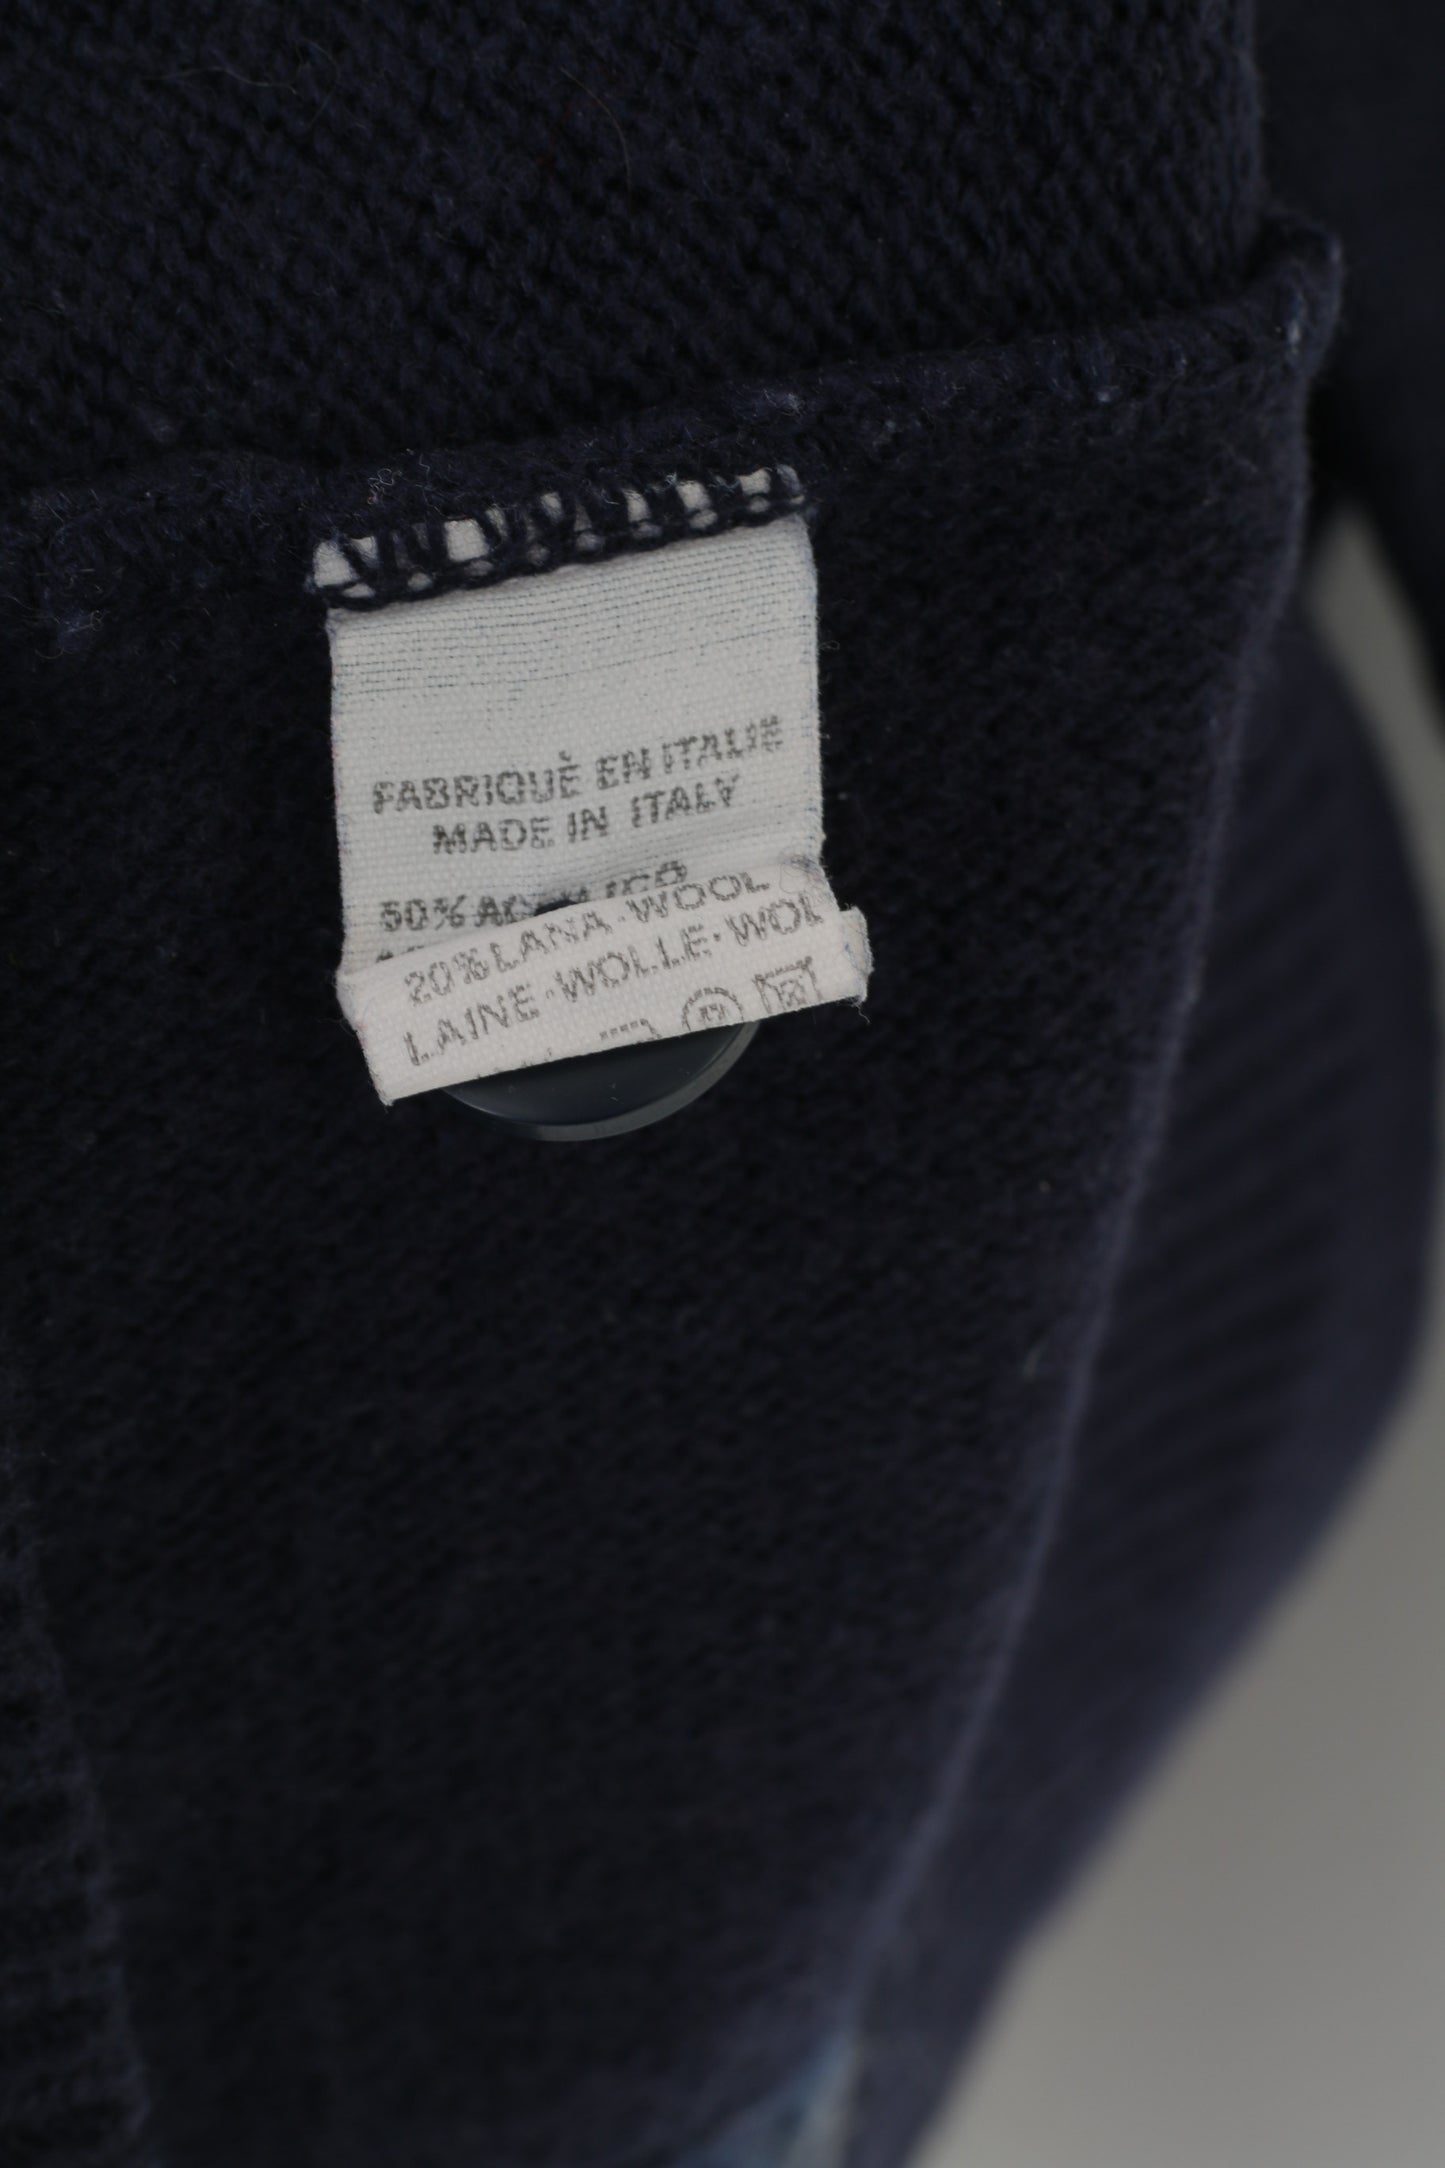 Alessandro Magno Men 3XL (2XL) Cardigan Navy Wool Vintage Made in Italy Sweater